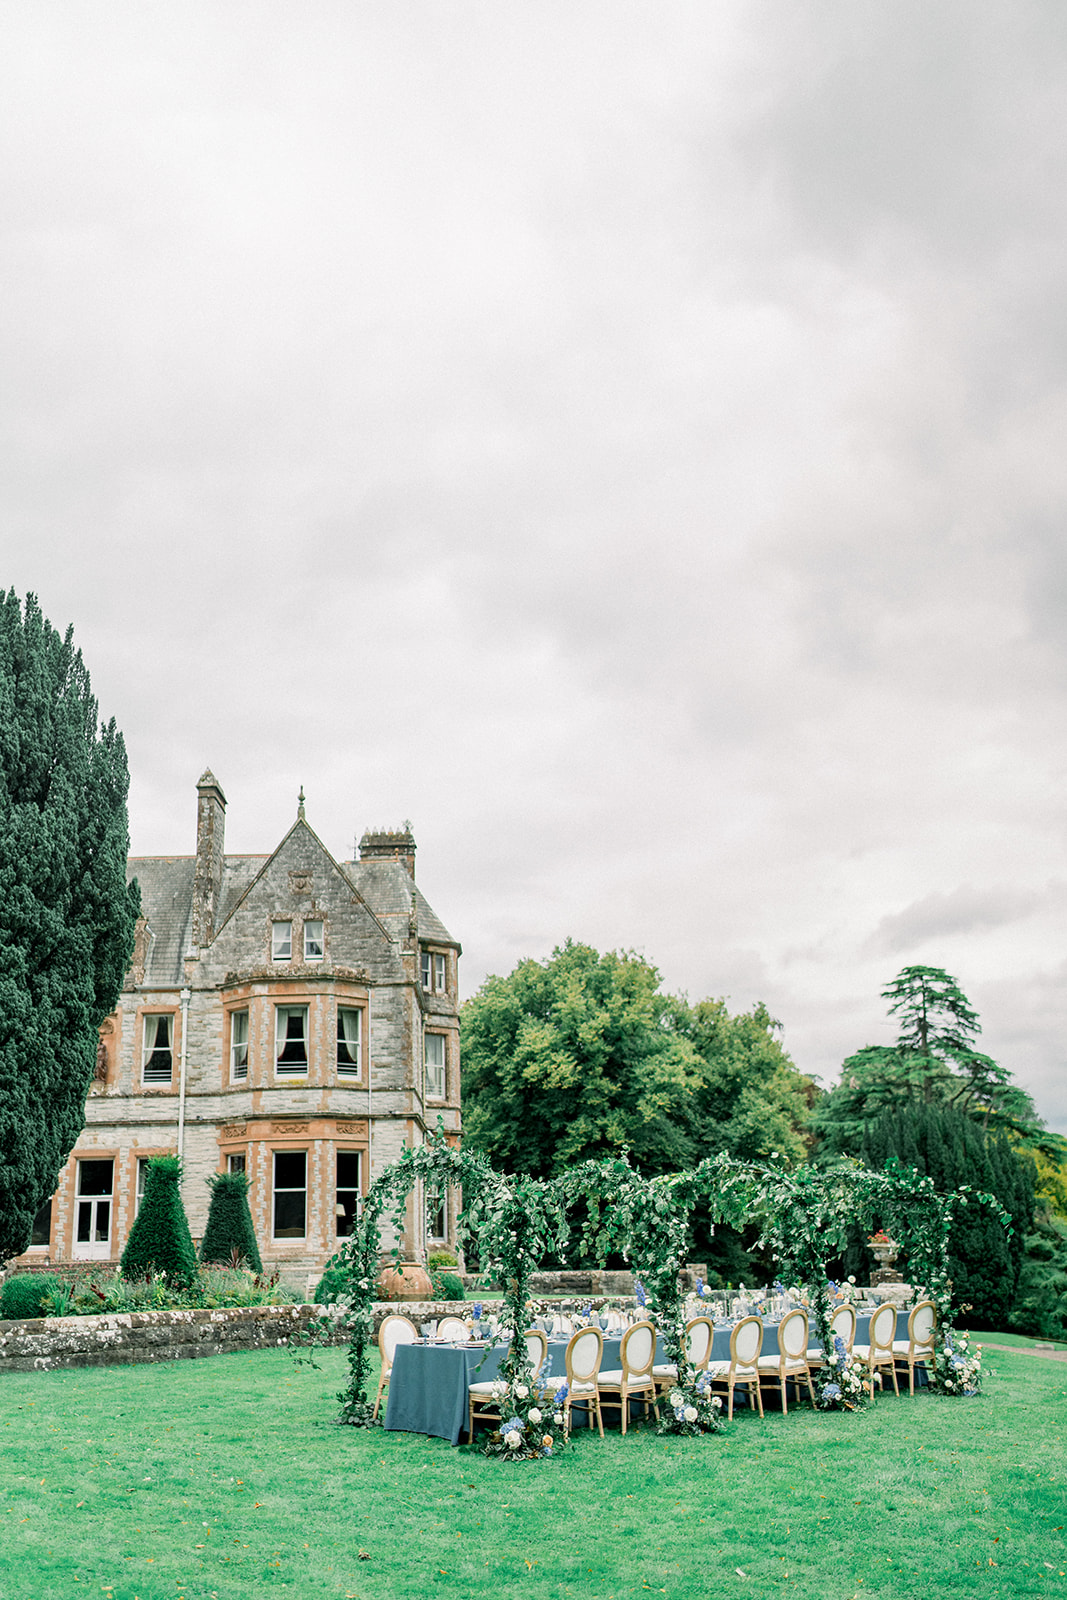 Outdoor reception by the lake at Castle Leslie, set for a magical destination wedding in the heart of Ireland.